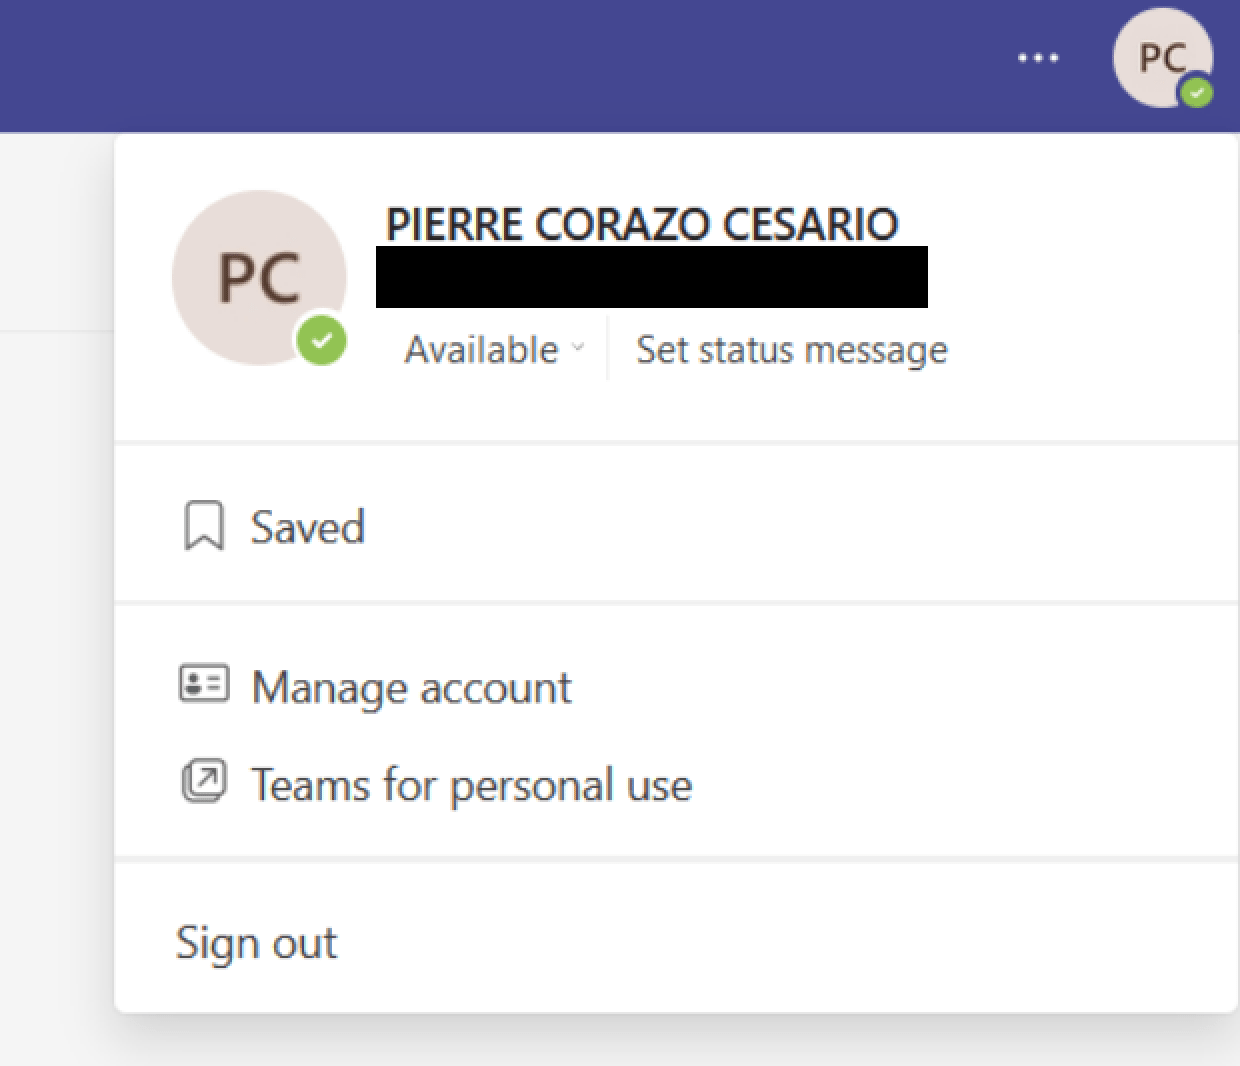 Re-log in to your account on desktop to fix Microsoft Teams assignment not working